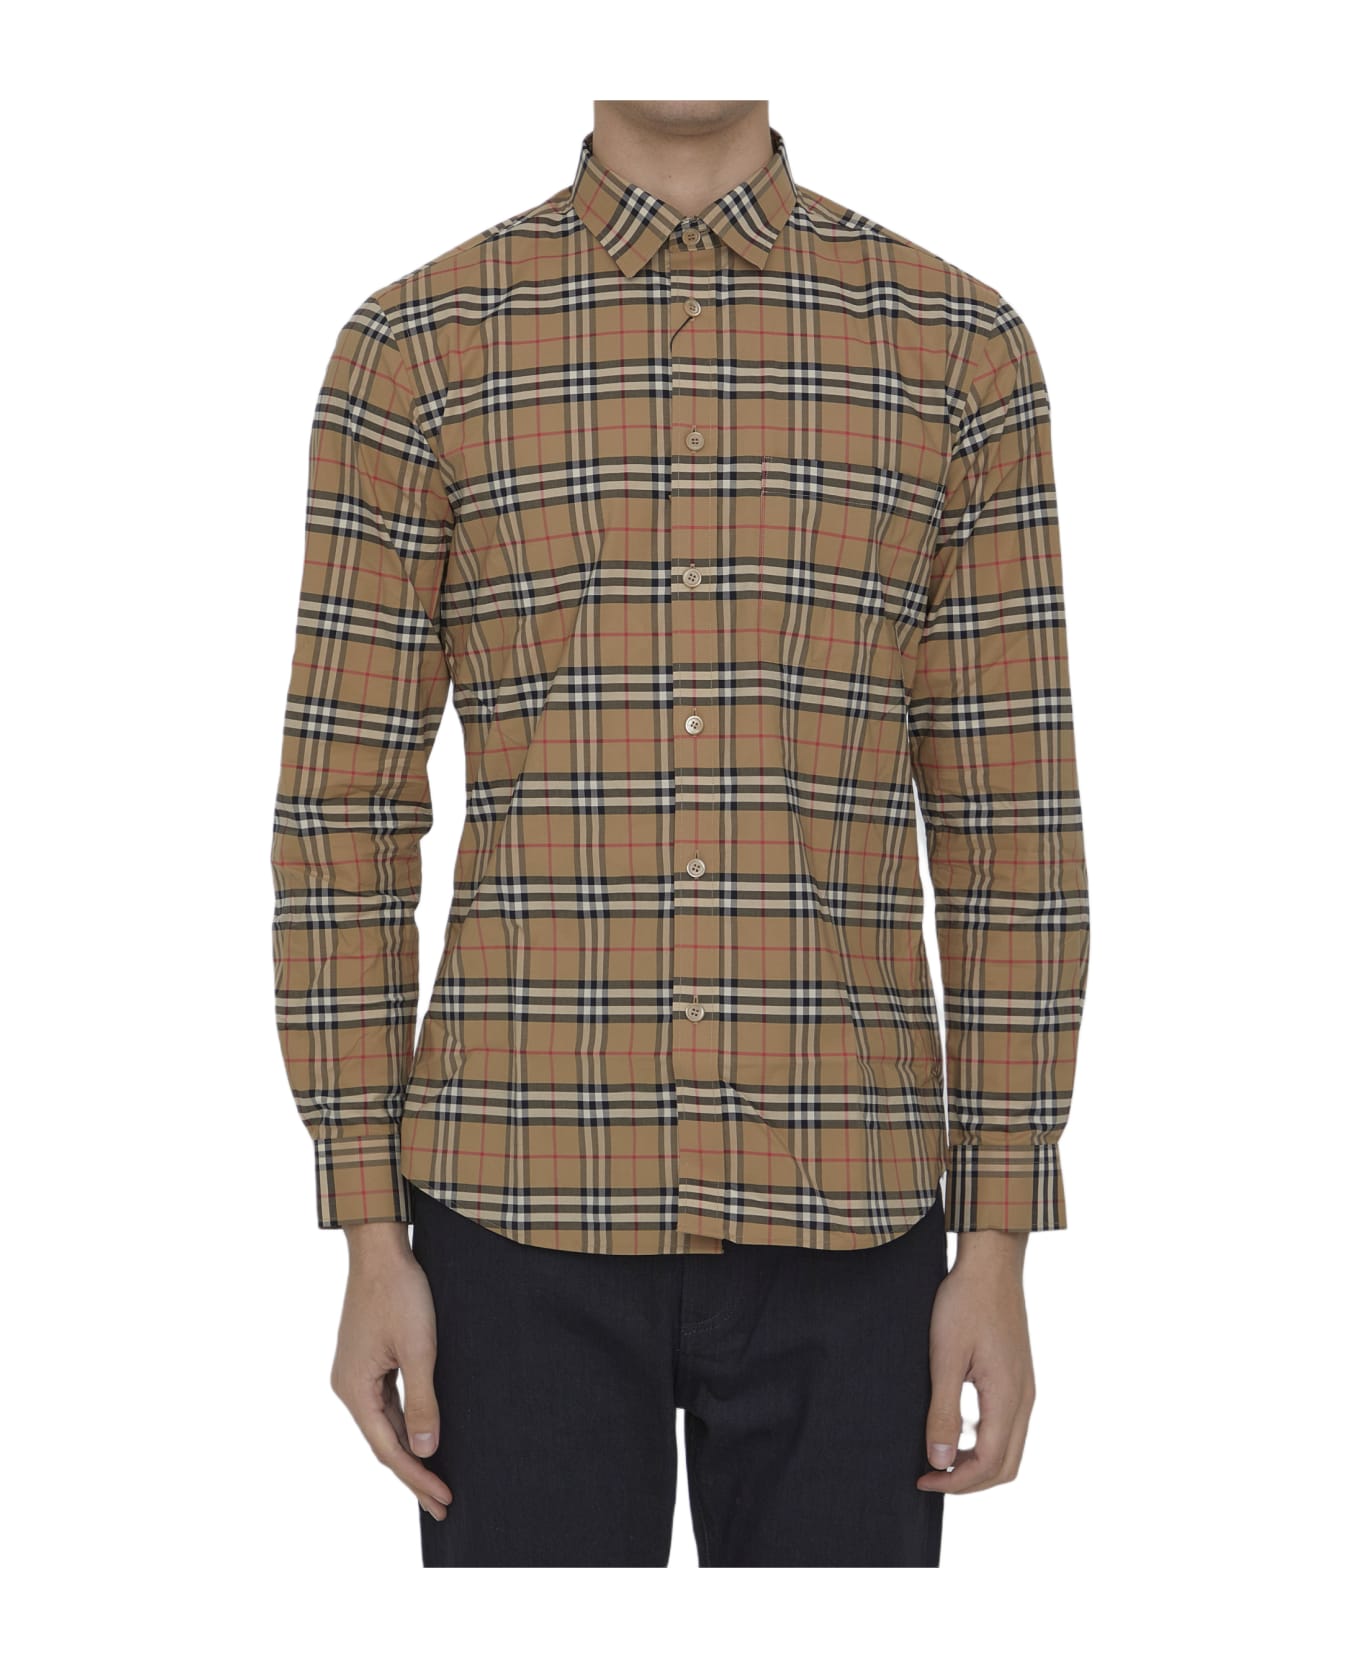 Burberry Small Check Shirt - BEIGE シャツ